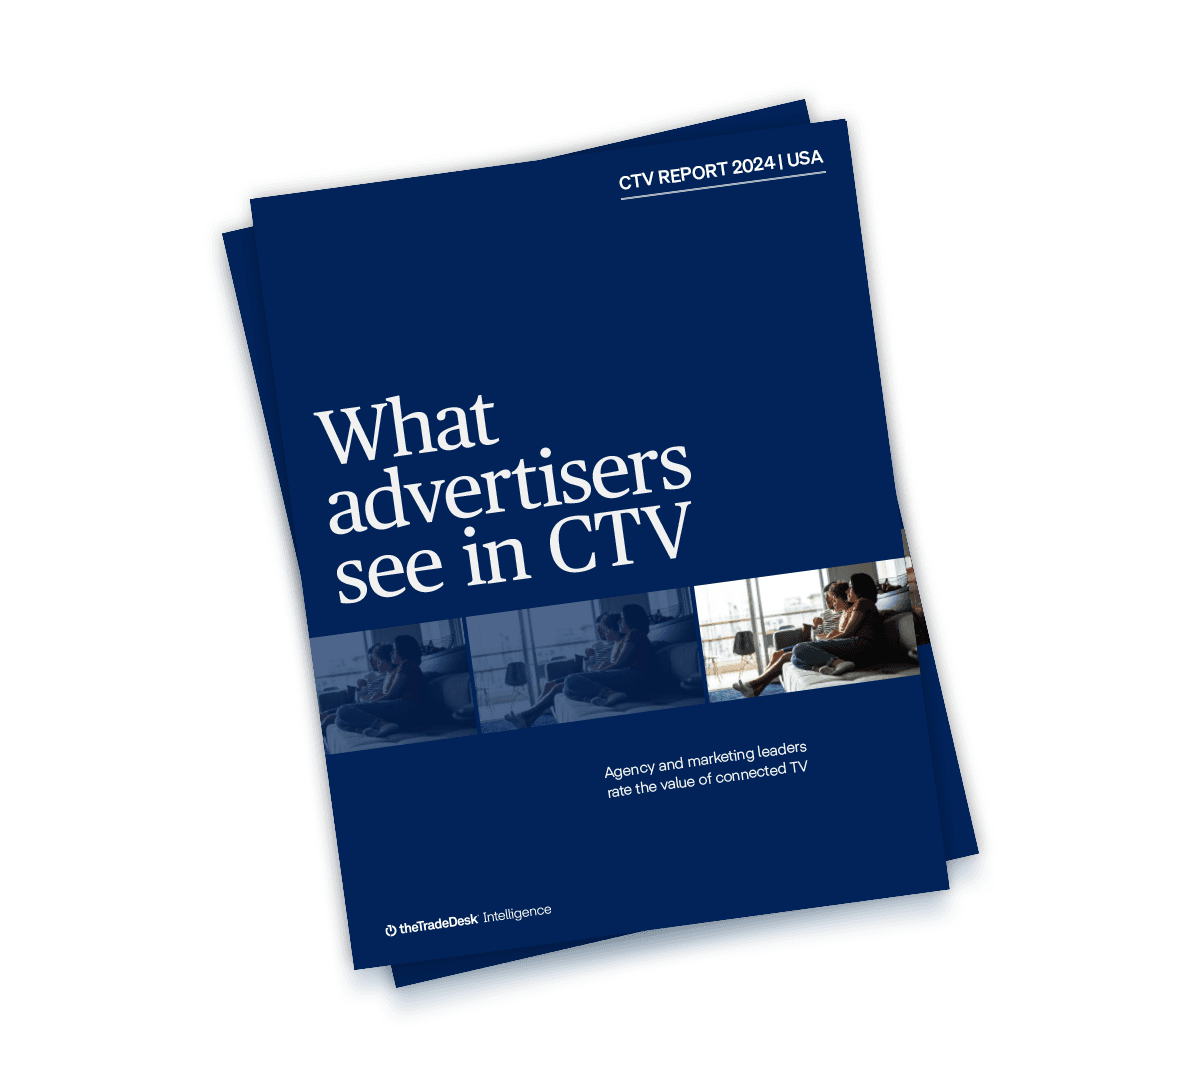 Report with the text "What advertisers see in CTV"